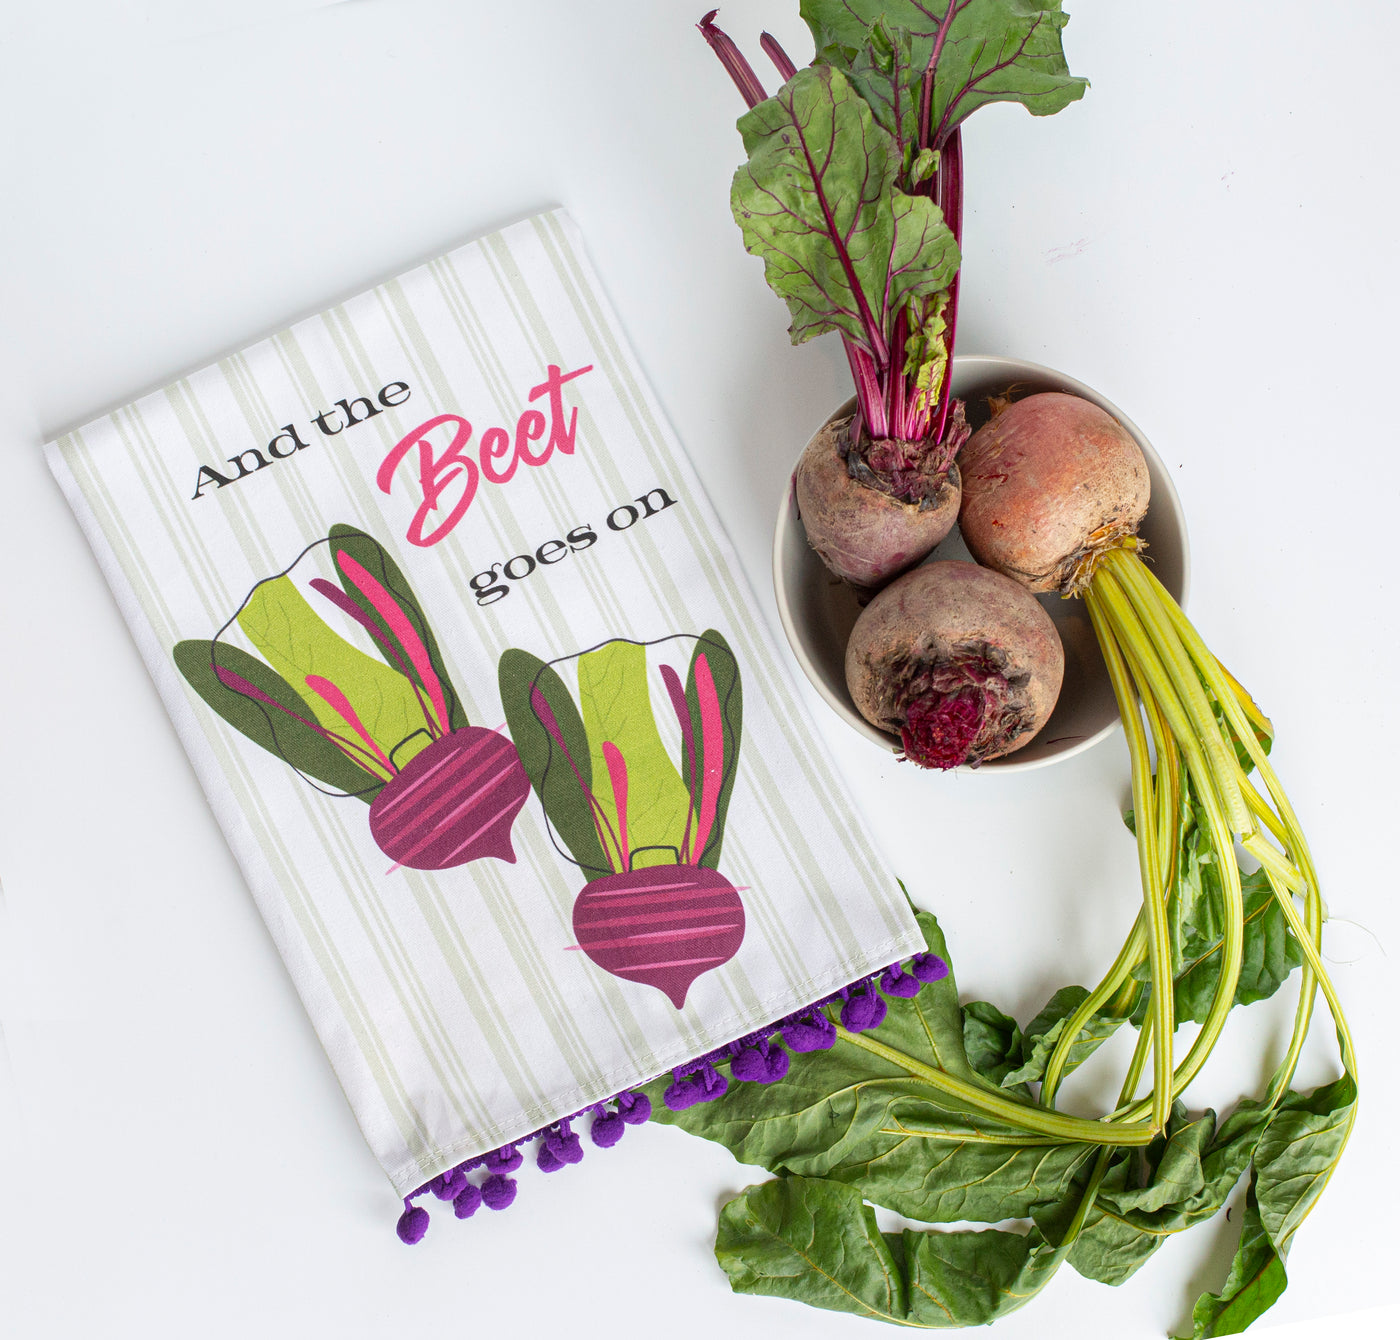 The Beet Goes On Kitchen Tea Towel with Trim